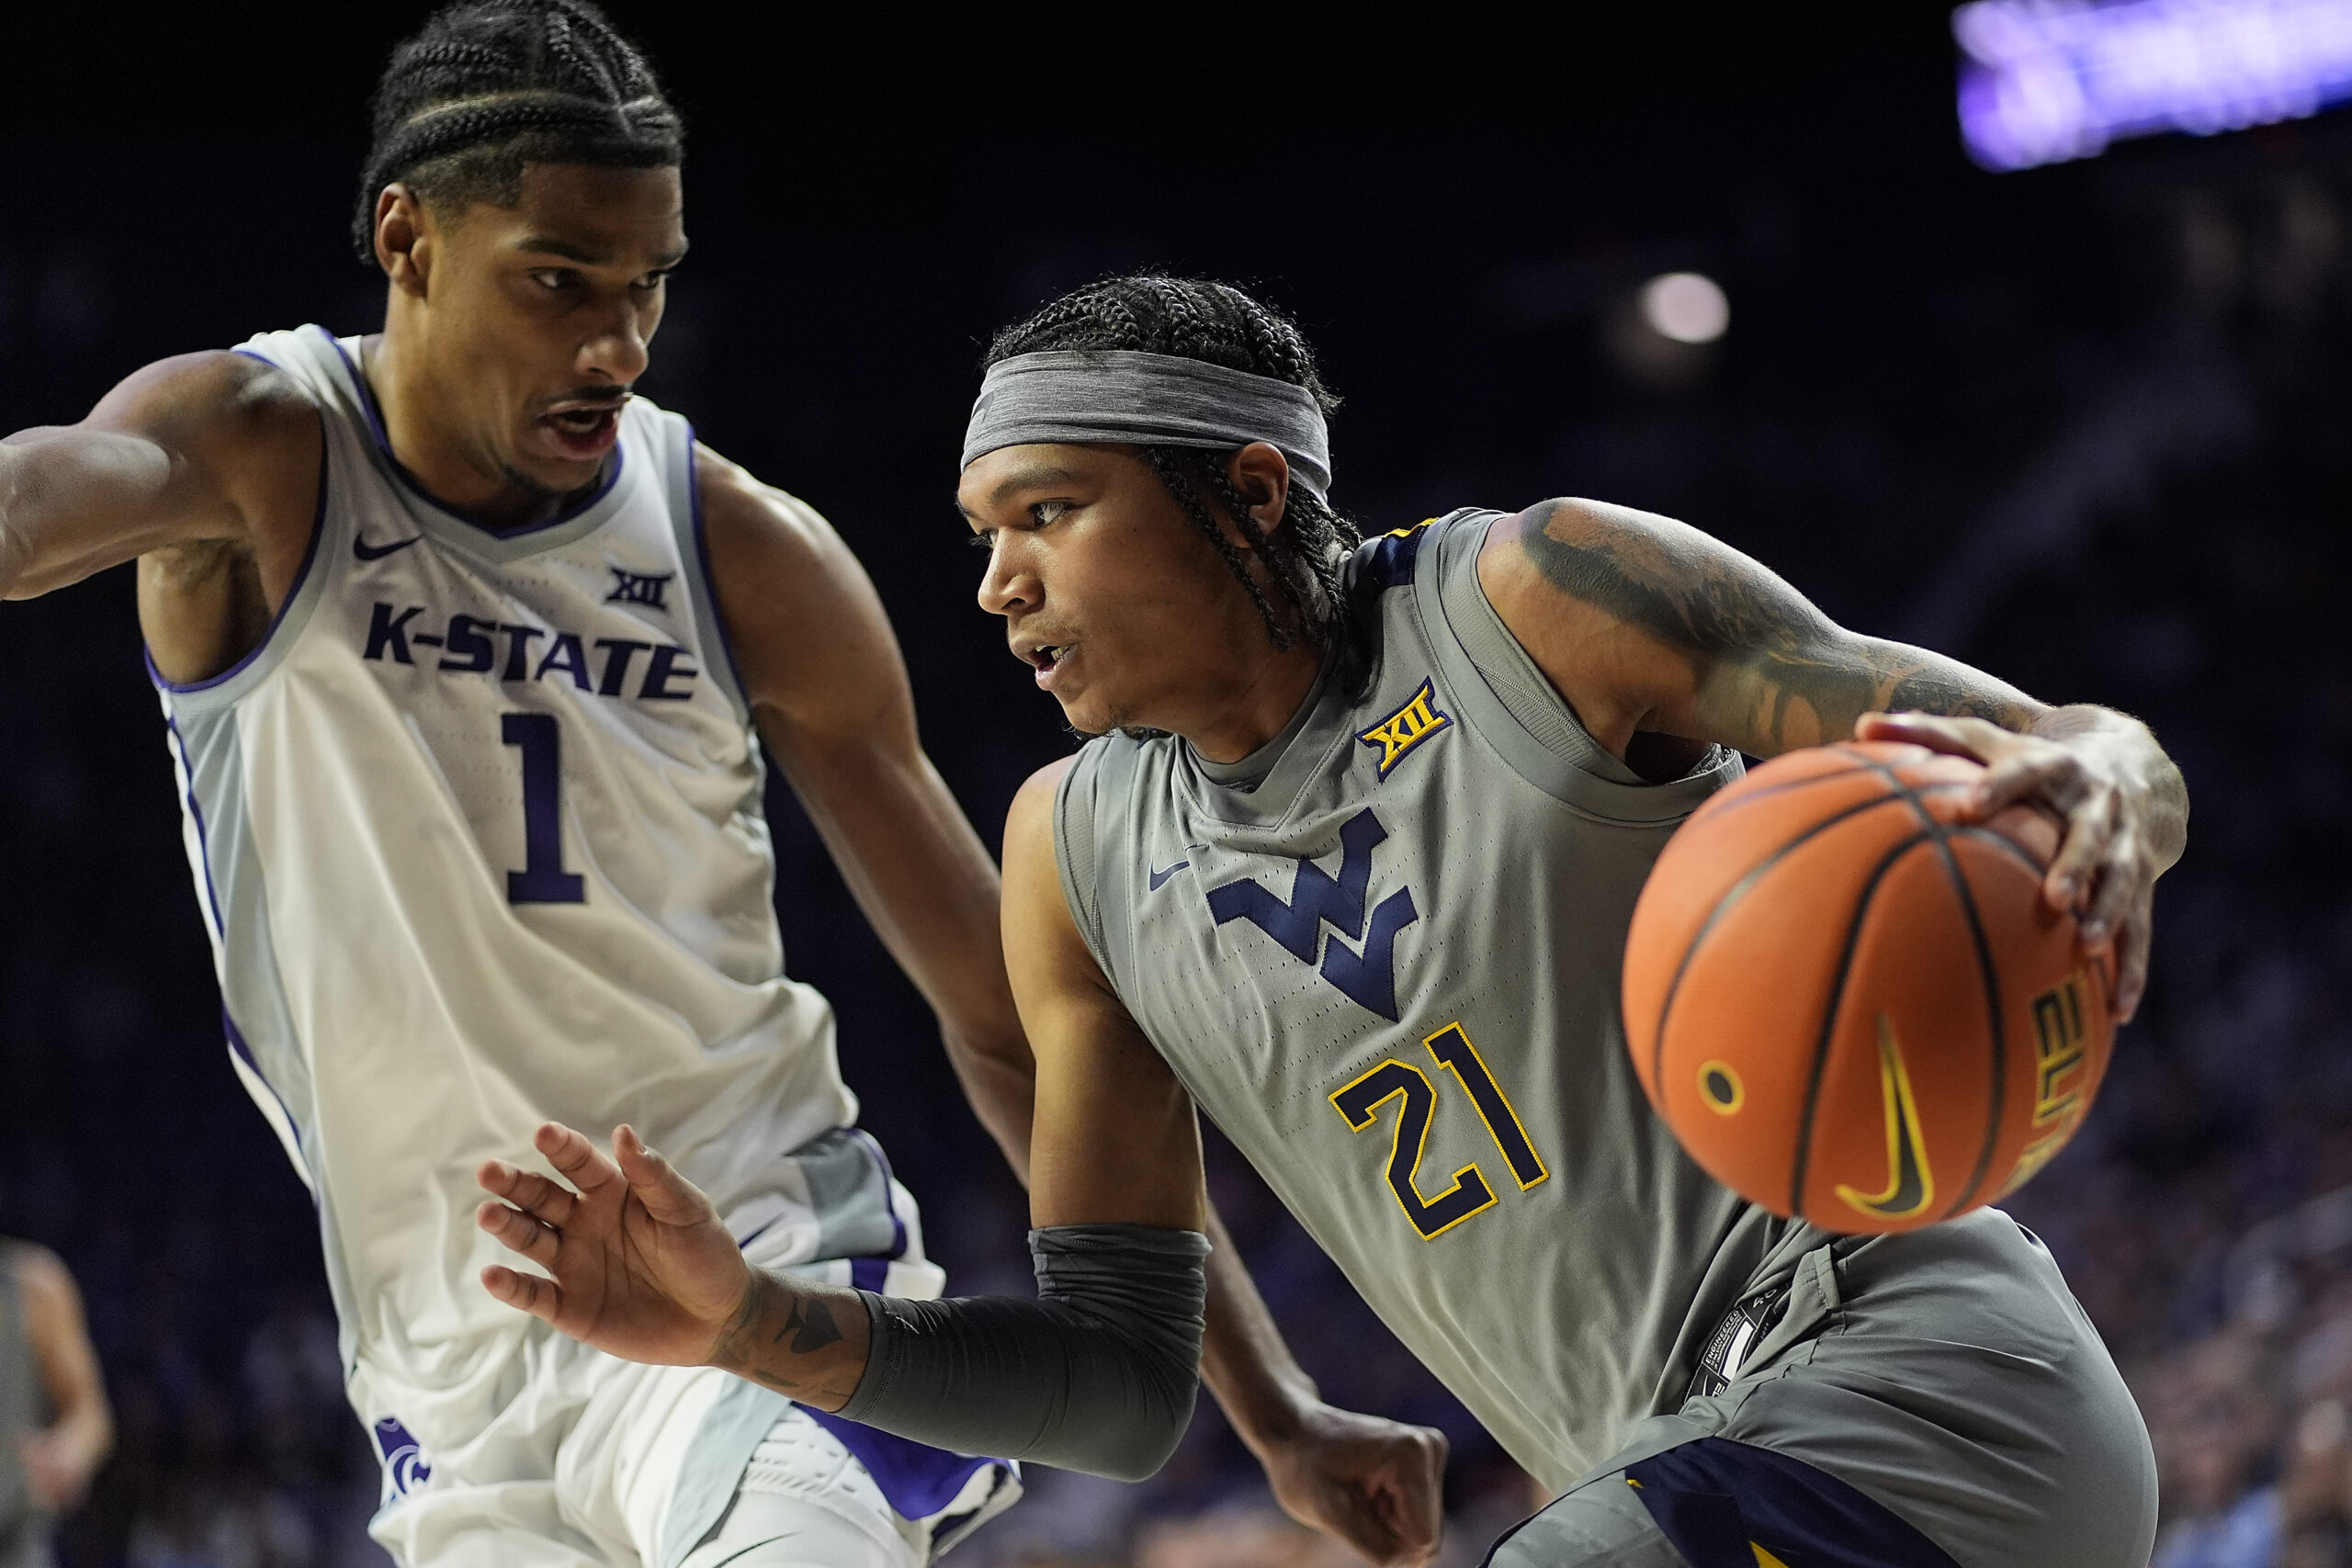 West Virginia's comeback bid comes up short, as Kansas State remained perfect in OT – Dominion Post